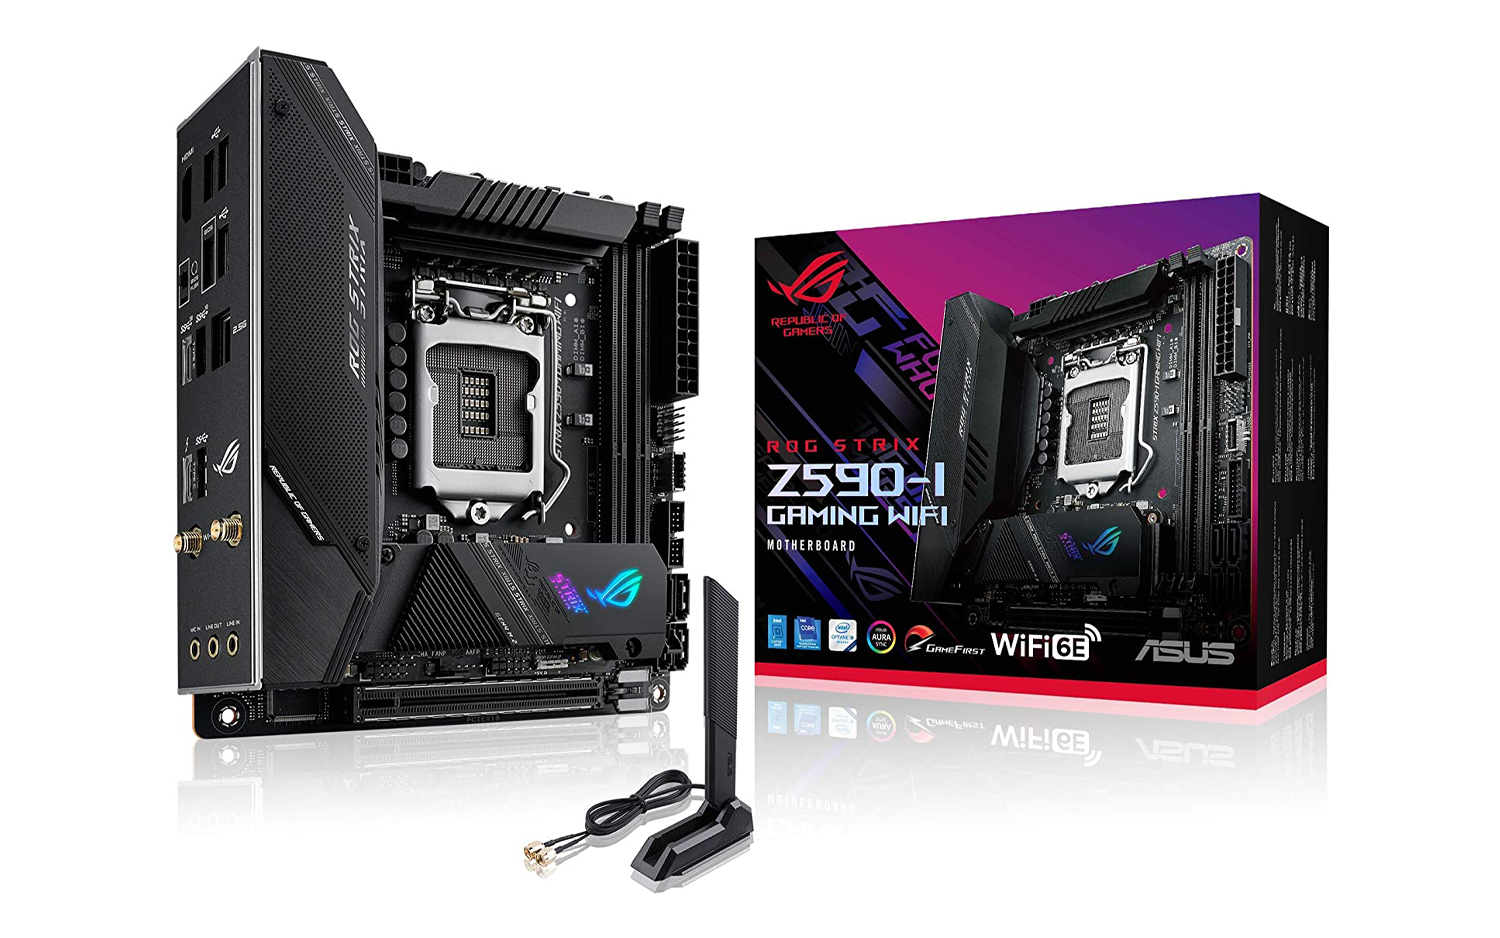 The Asus ROG Strix Z590-I is a small form factor boasts an all-black design and diagonal mesh lines.